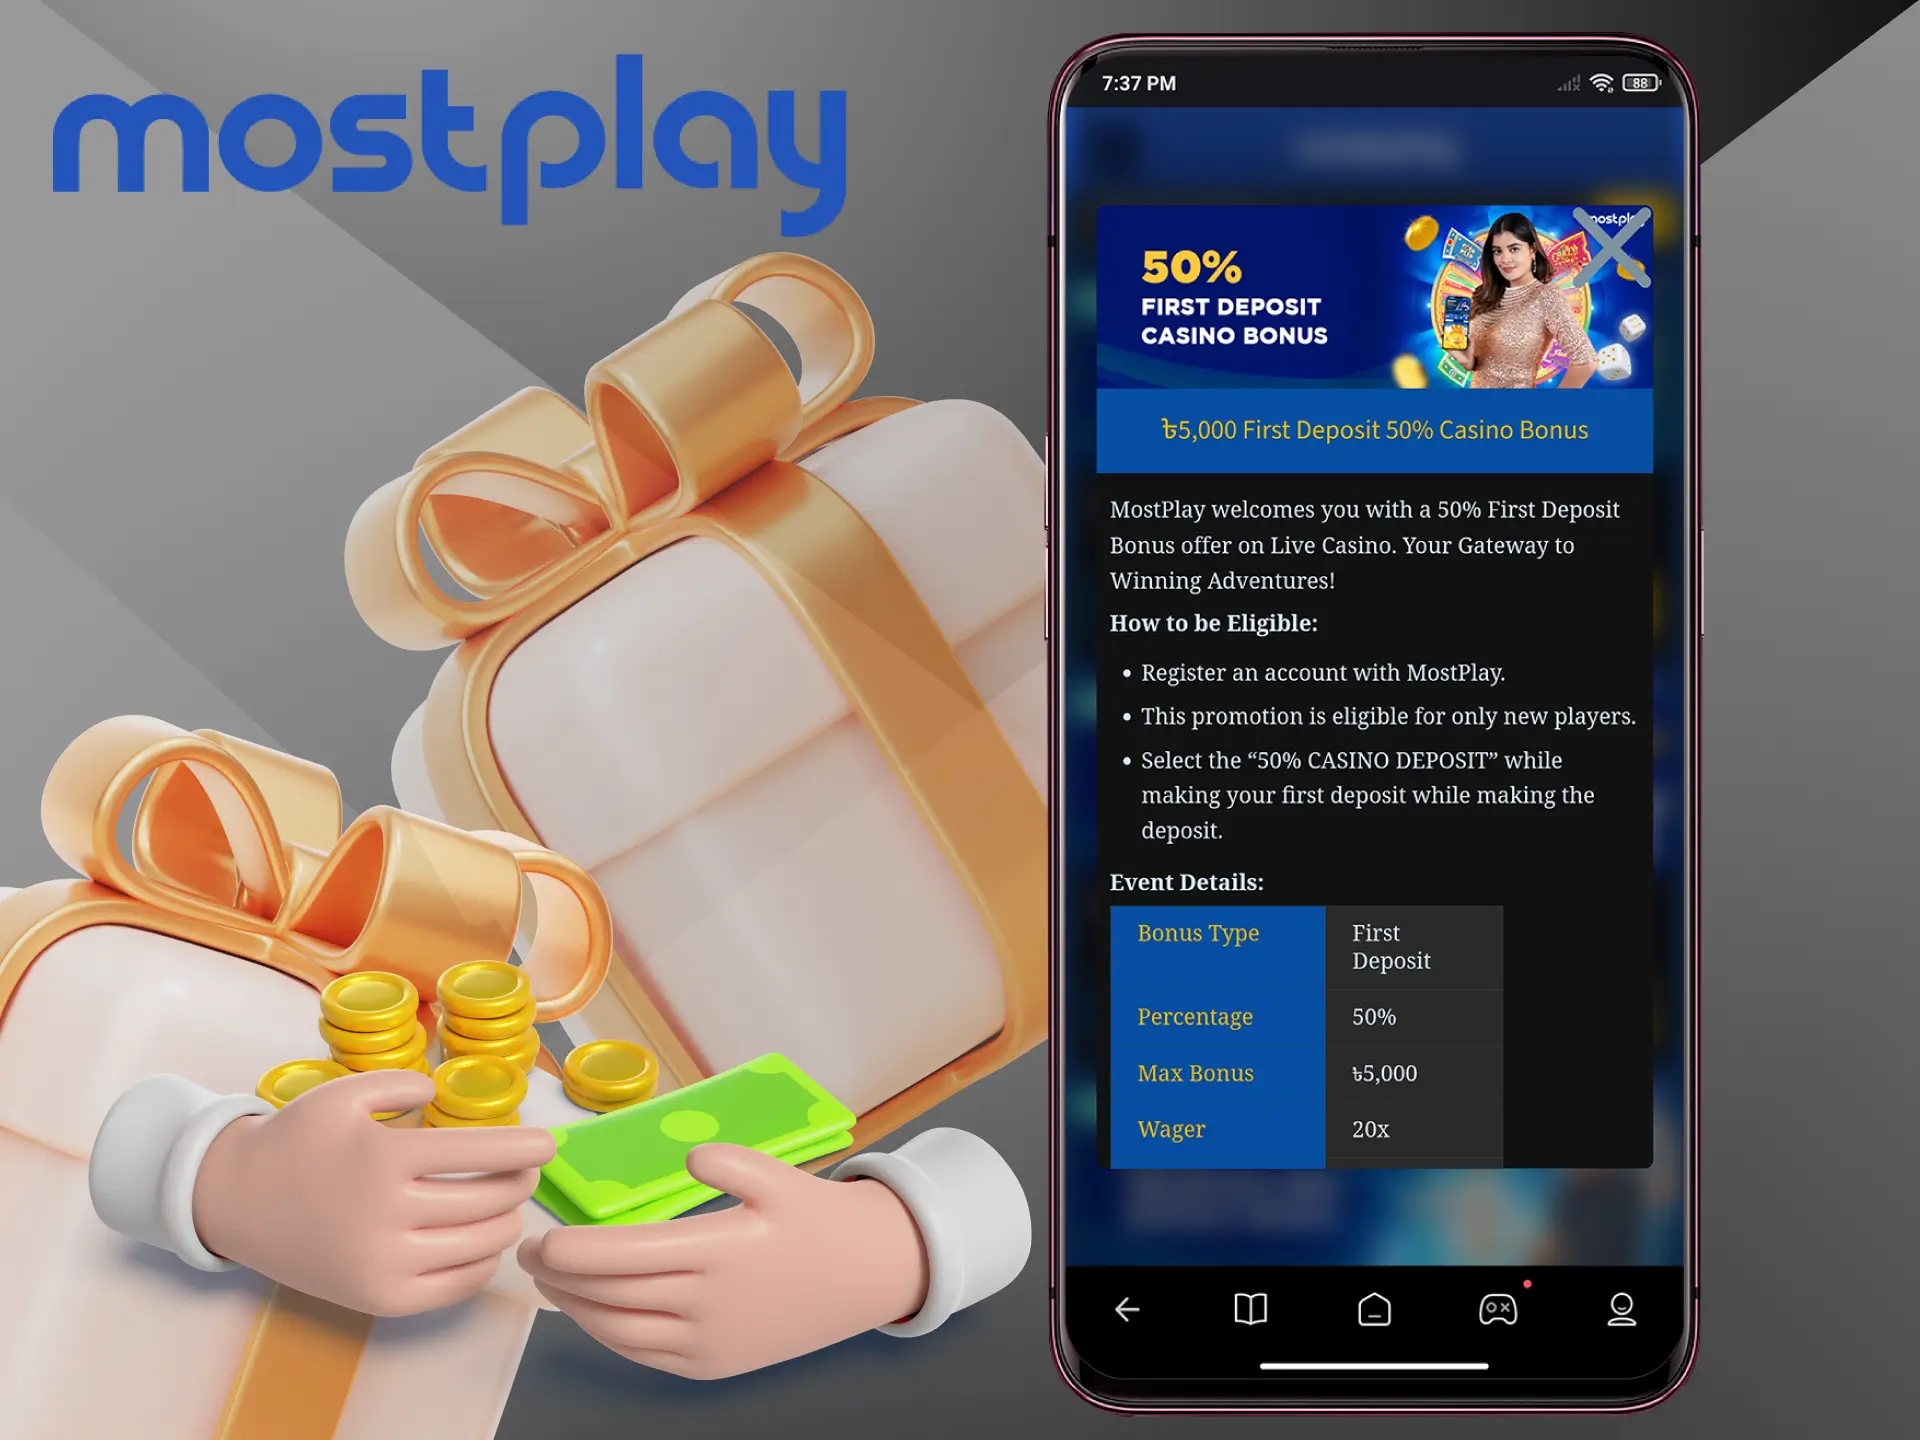 Make your first deposit and receive a welcome bonus to play your favourite slots from Mostplay Casino.